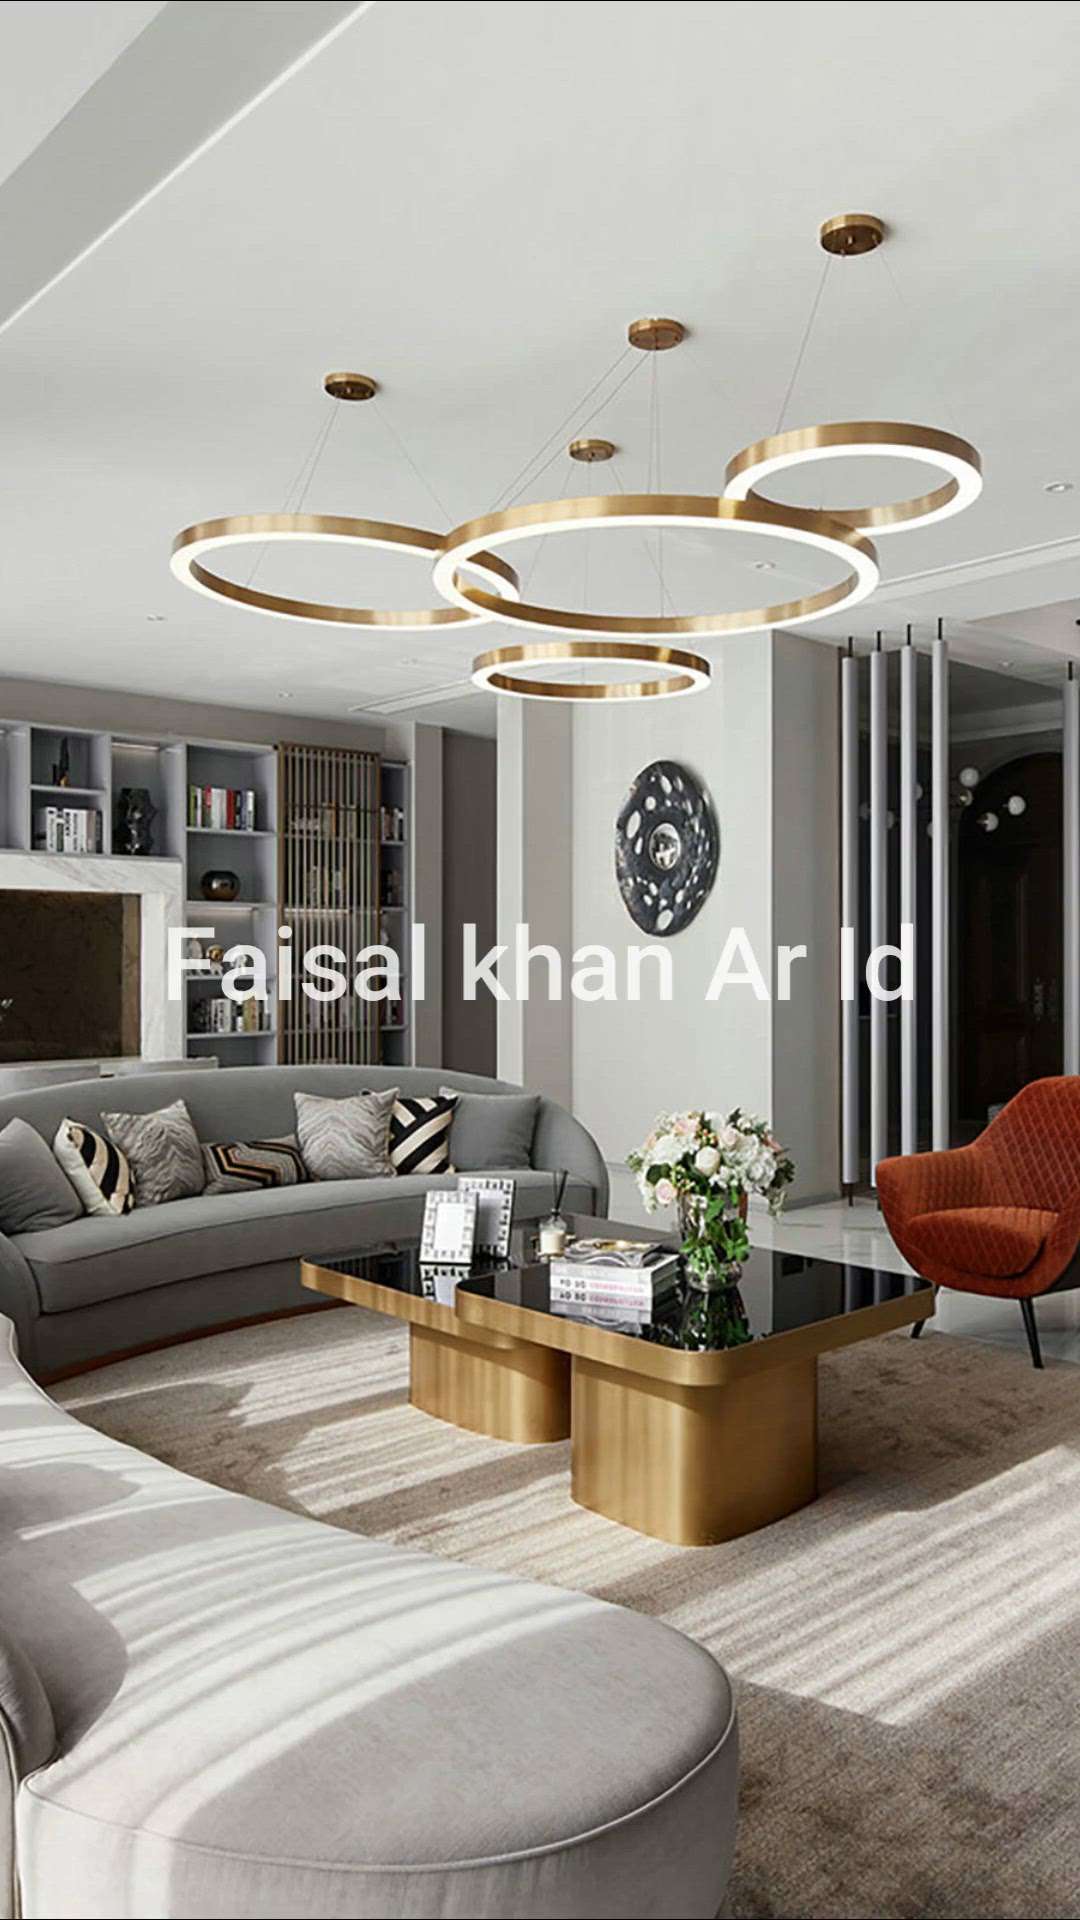 Call Or WhatsApp Faisal Khan: +91‐9024506026

Have A Look At Our Astounding Modern Home Design 

We Are Offering The Following Services 
👉 3D Bungalow Front Eliveshon.👈
👉 3D Bungalow Eliveshon Design.👈
👉 3D Bungalow Day & Night View.👈
👉 3D Bungalow Interior Design.👈
👉 3D Bungalow Landscape Design👈
👉 3D Bungalow Walkthrough.👈

For More Information 
Call Or WhatsApp Faisal Khan: +91‐9024506026

Mail Your Floor Plans 
Email Us On: Faisalkhan3dstudio@gmail.com
.
.
.
.
.
.
.
.
.
#3d #3dsmax #vray #autocad #photoshop #intiriordesign #extiriordesign #3dmodel #3dvisualization #architecture #intreriordesign #3dartist #Viral  #faisalkhan3dstudio